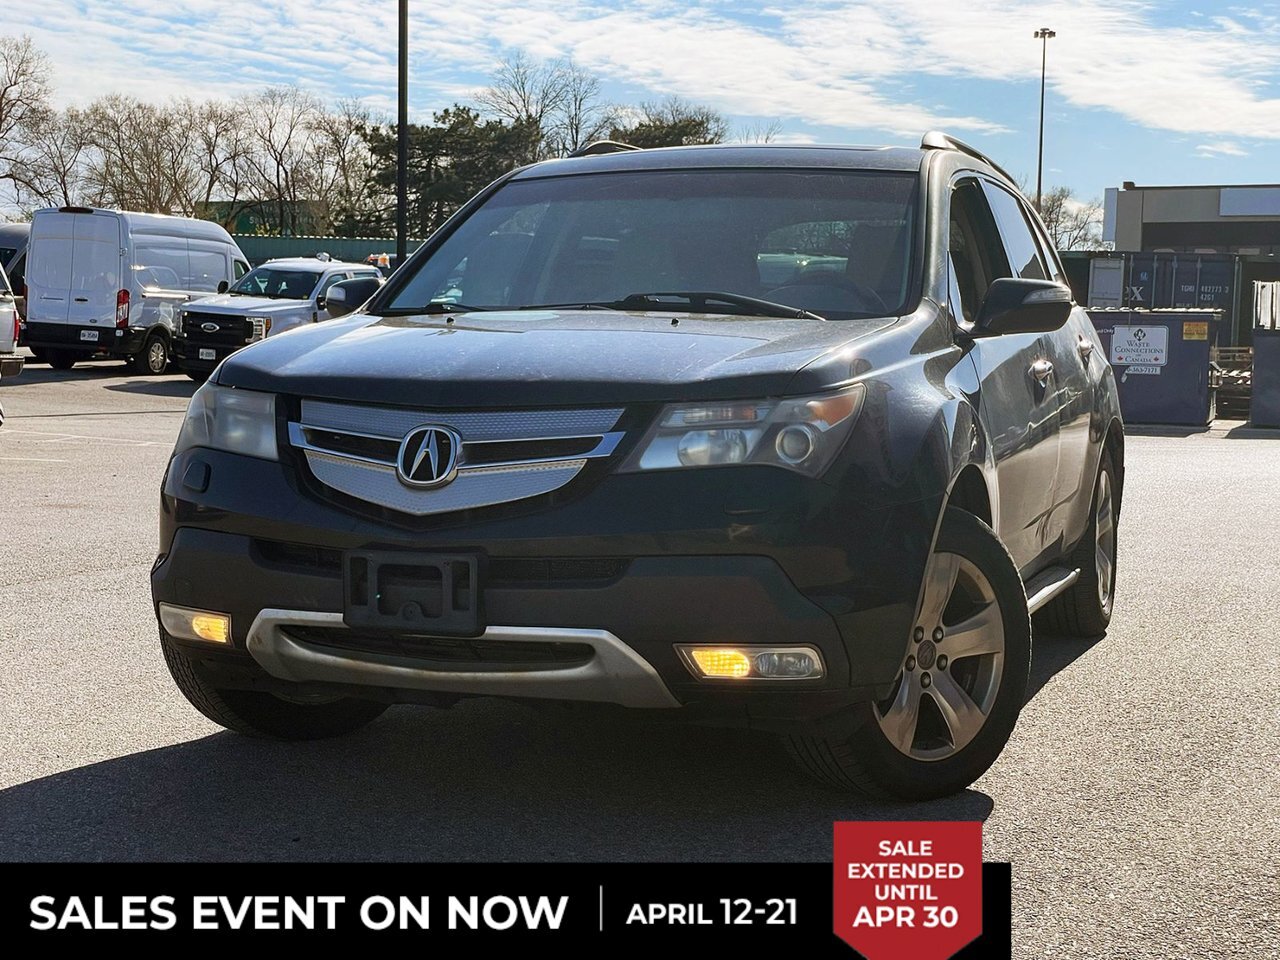 2007 Acura MDX Elite 5sp at AS - IS | You Certify, You Save | Nav